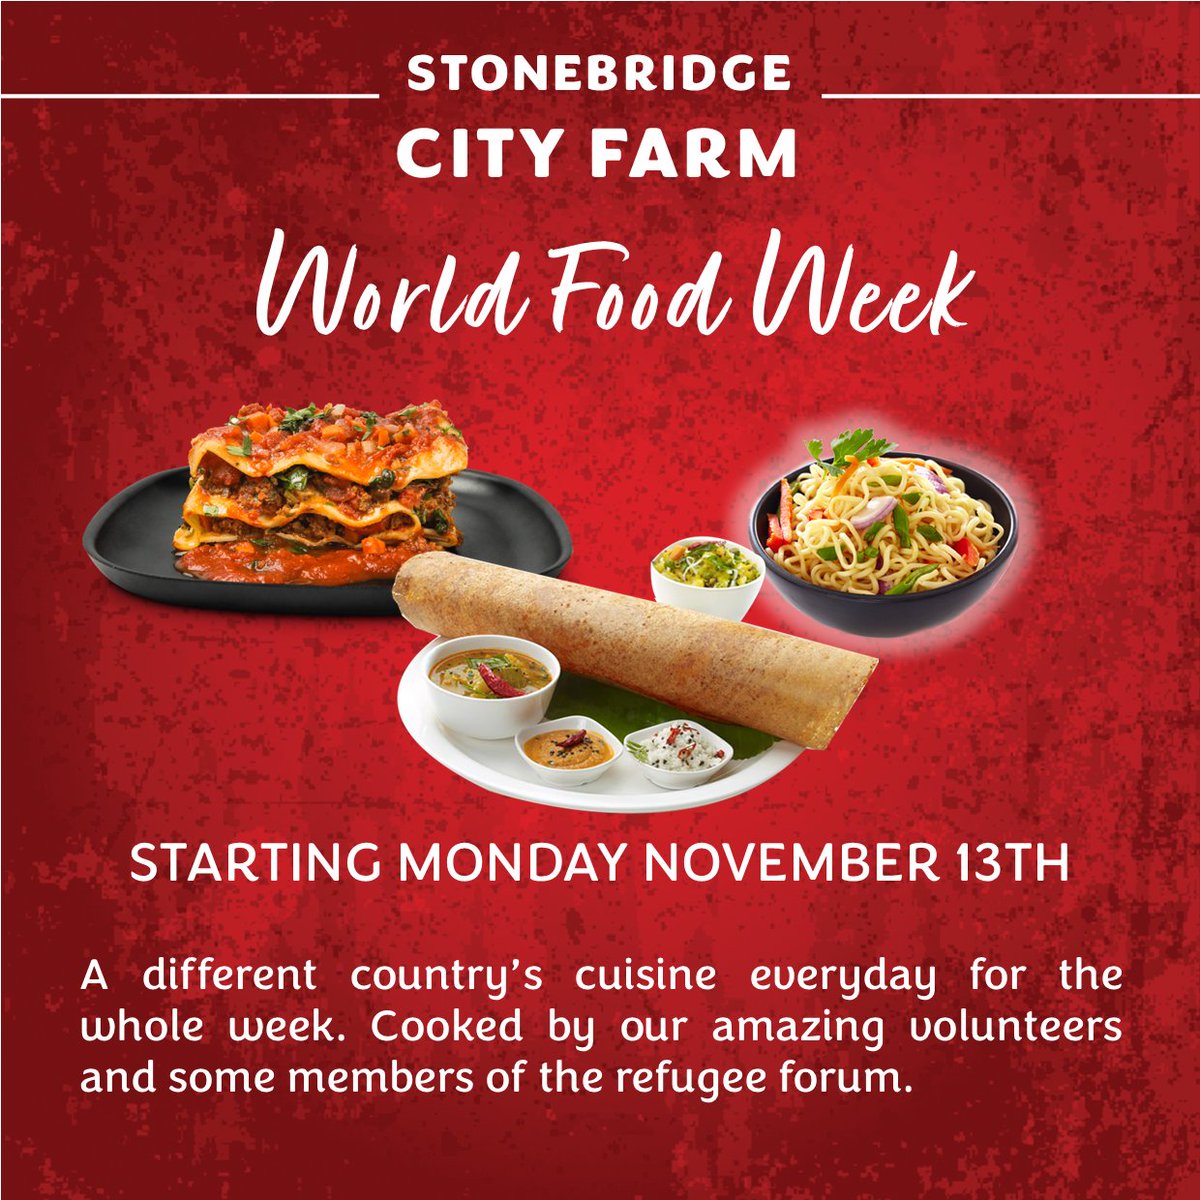 Only one week to go to our World Food Week! Each day we will be celebrating cuisine from a different country. From Poland, to South Africa via Italy and Mexico, we can't wait! #nottingham #notts #food #worldfoodweek #cityfarm